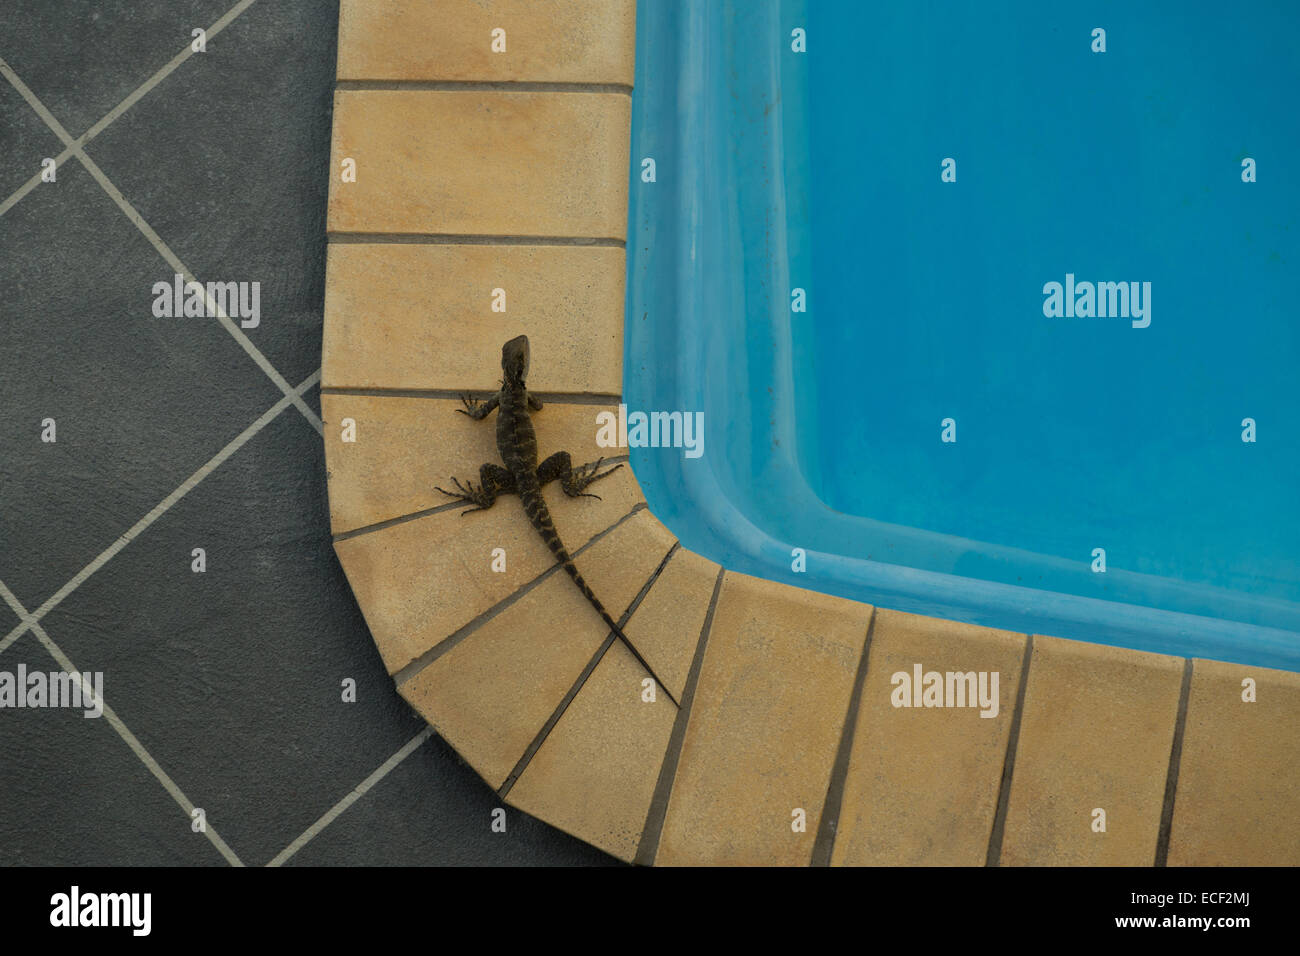 A photograph of an Australian Water Dragon (lizard) next to a swimming pool. The photograph is taken from above. Stock Photo